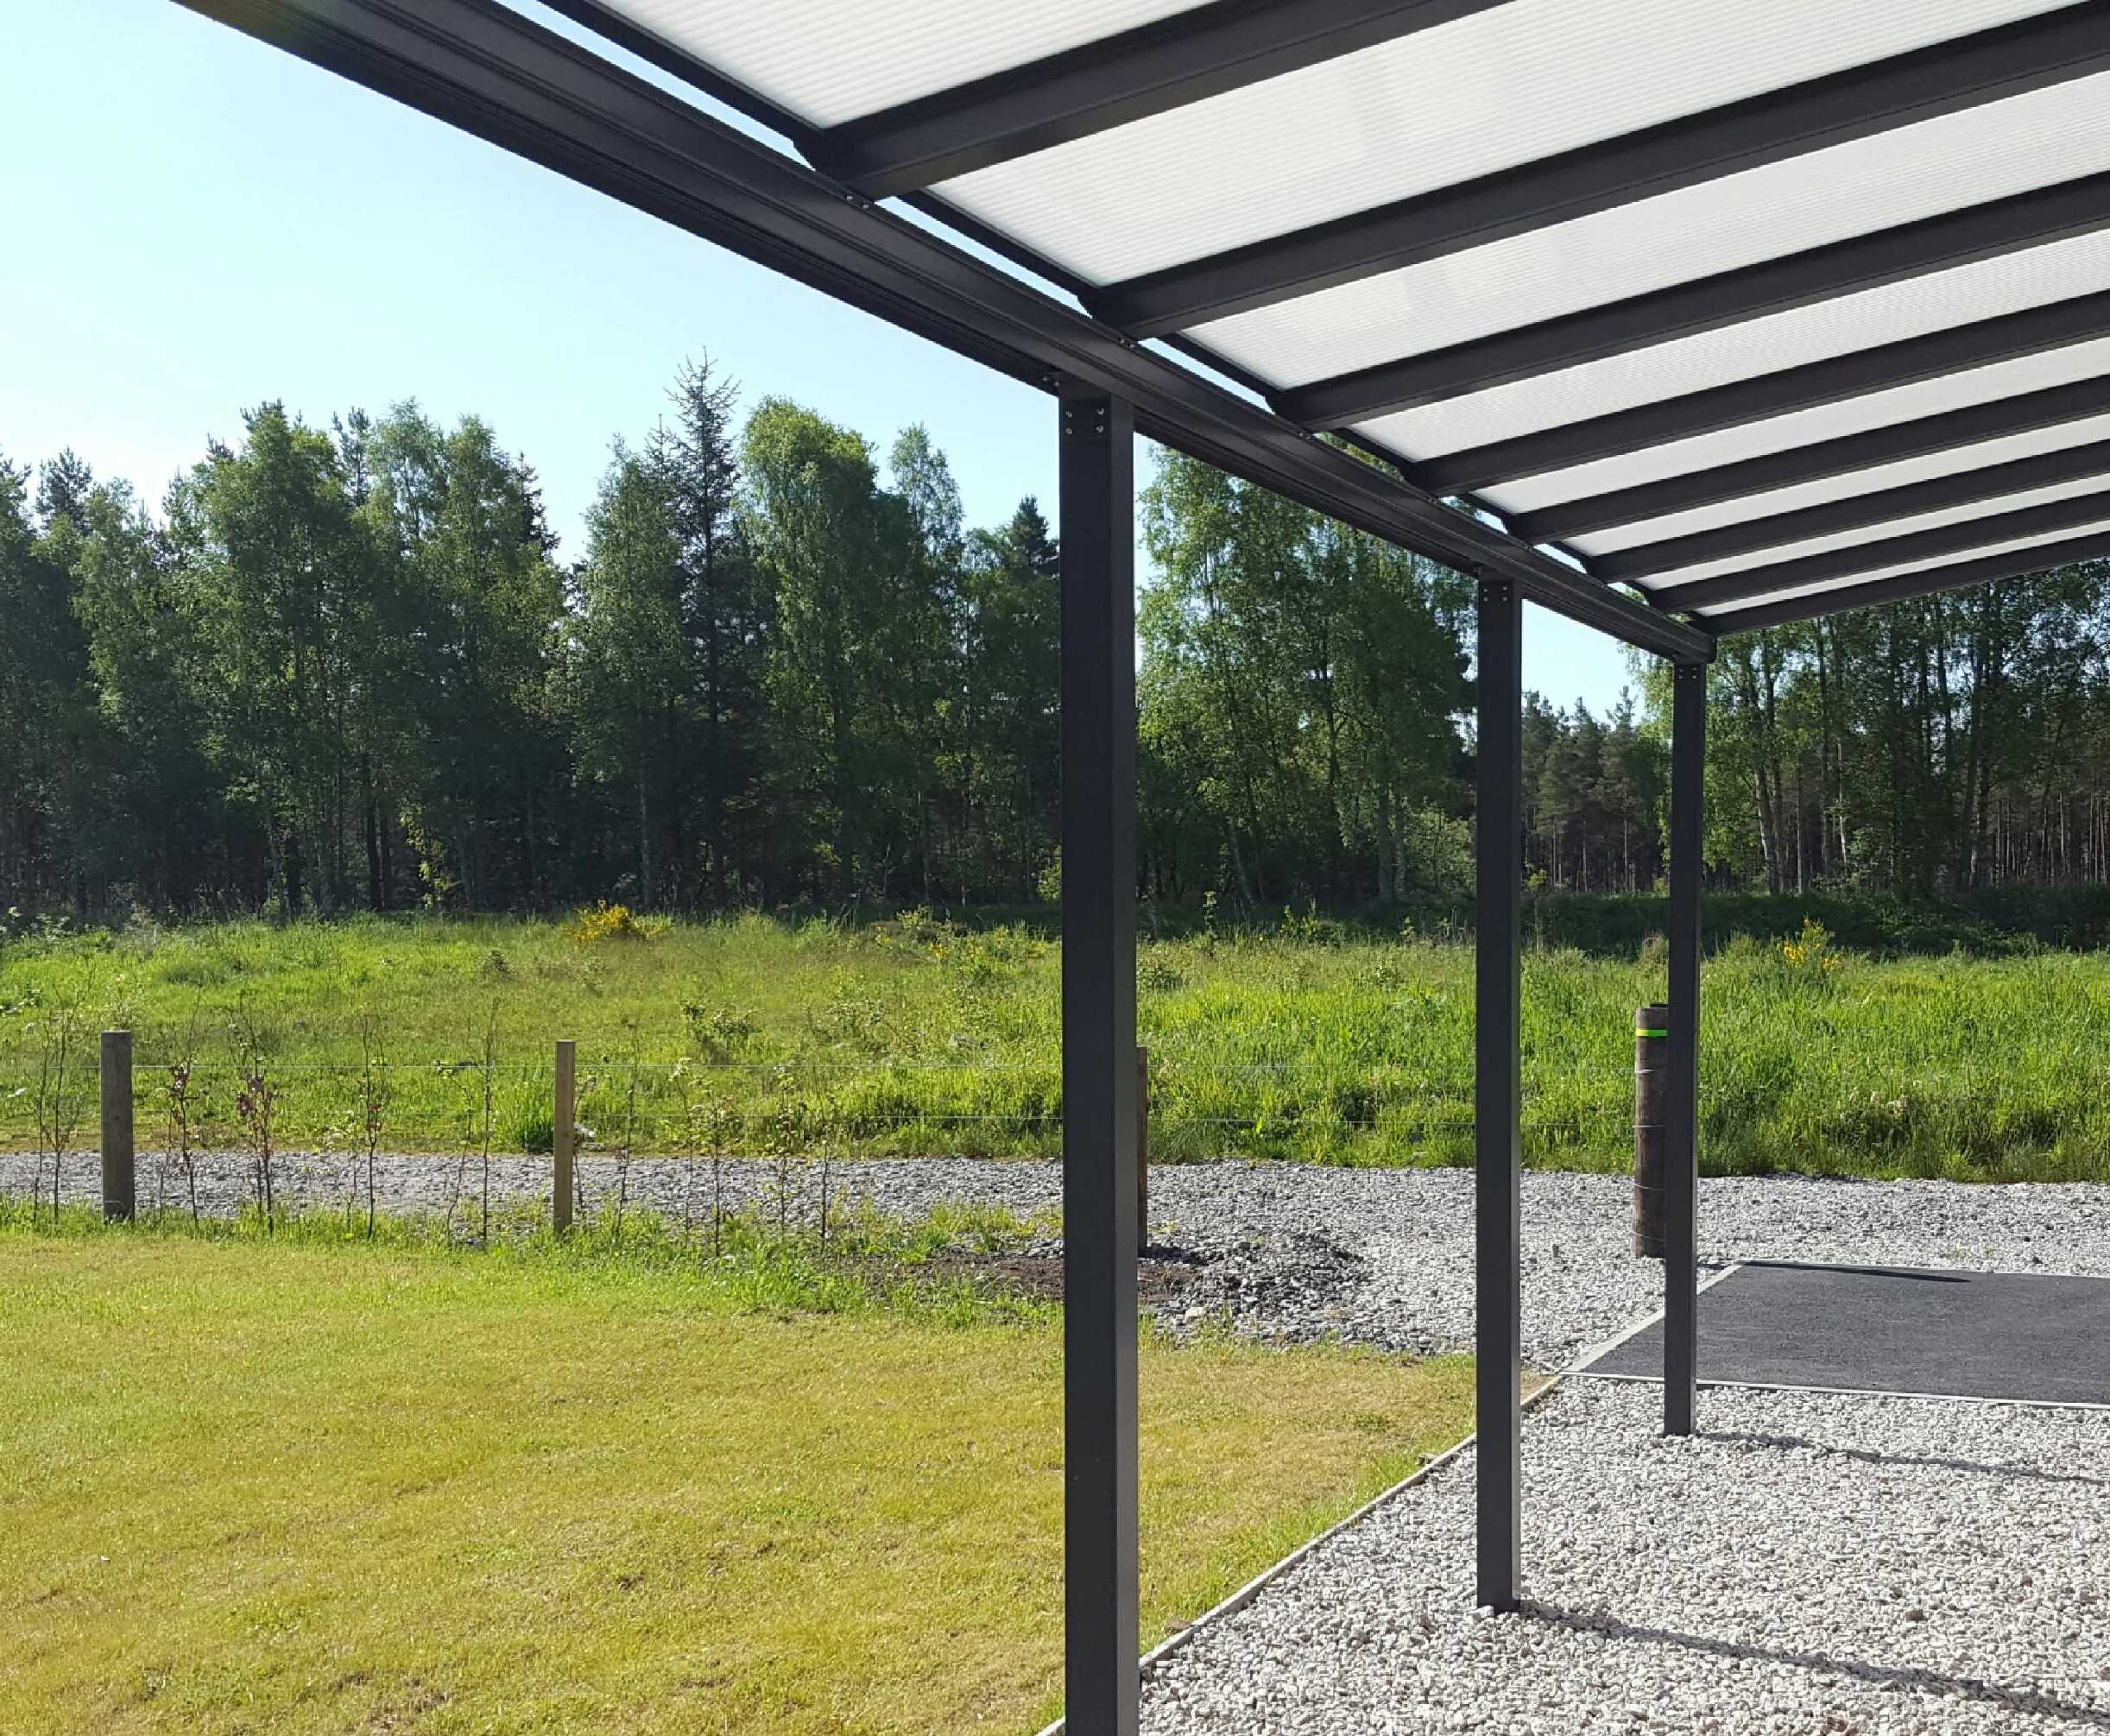 Omega Smart Lean-To Canopy, Anthracite Grey, UNGLAZED for 6mm Glazing - 7.0m (W) x 1.5m (P), (4) Supporting Posts